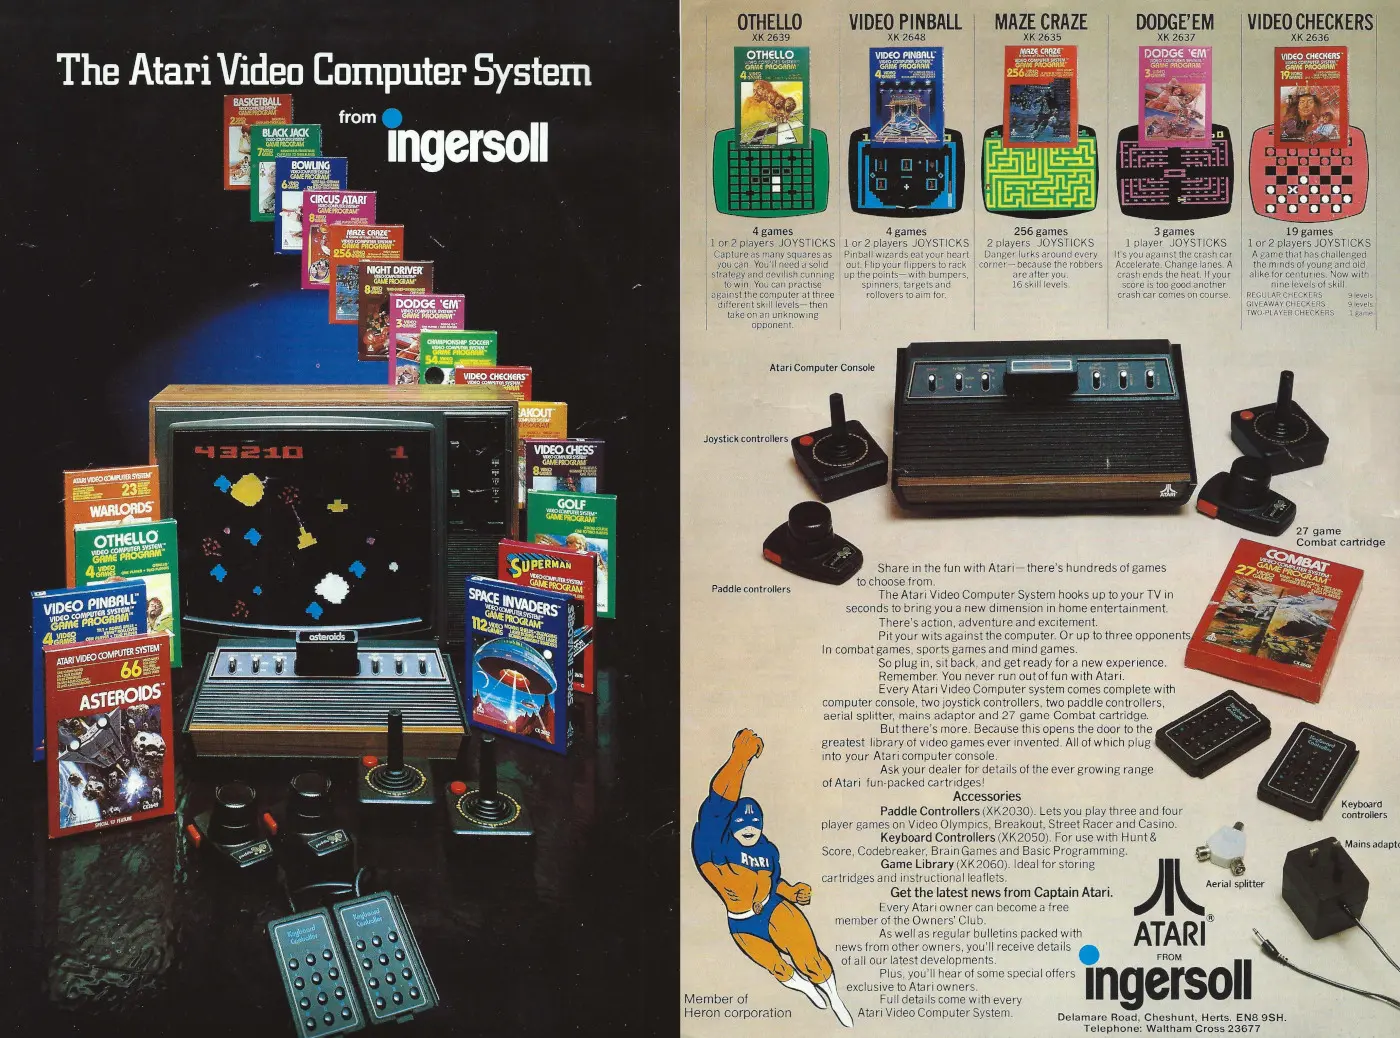 Atari Advert: The Atari Video Computer System from Ingersoll, from Sales Brochure, June 1982